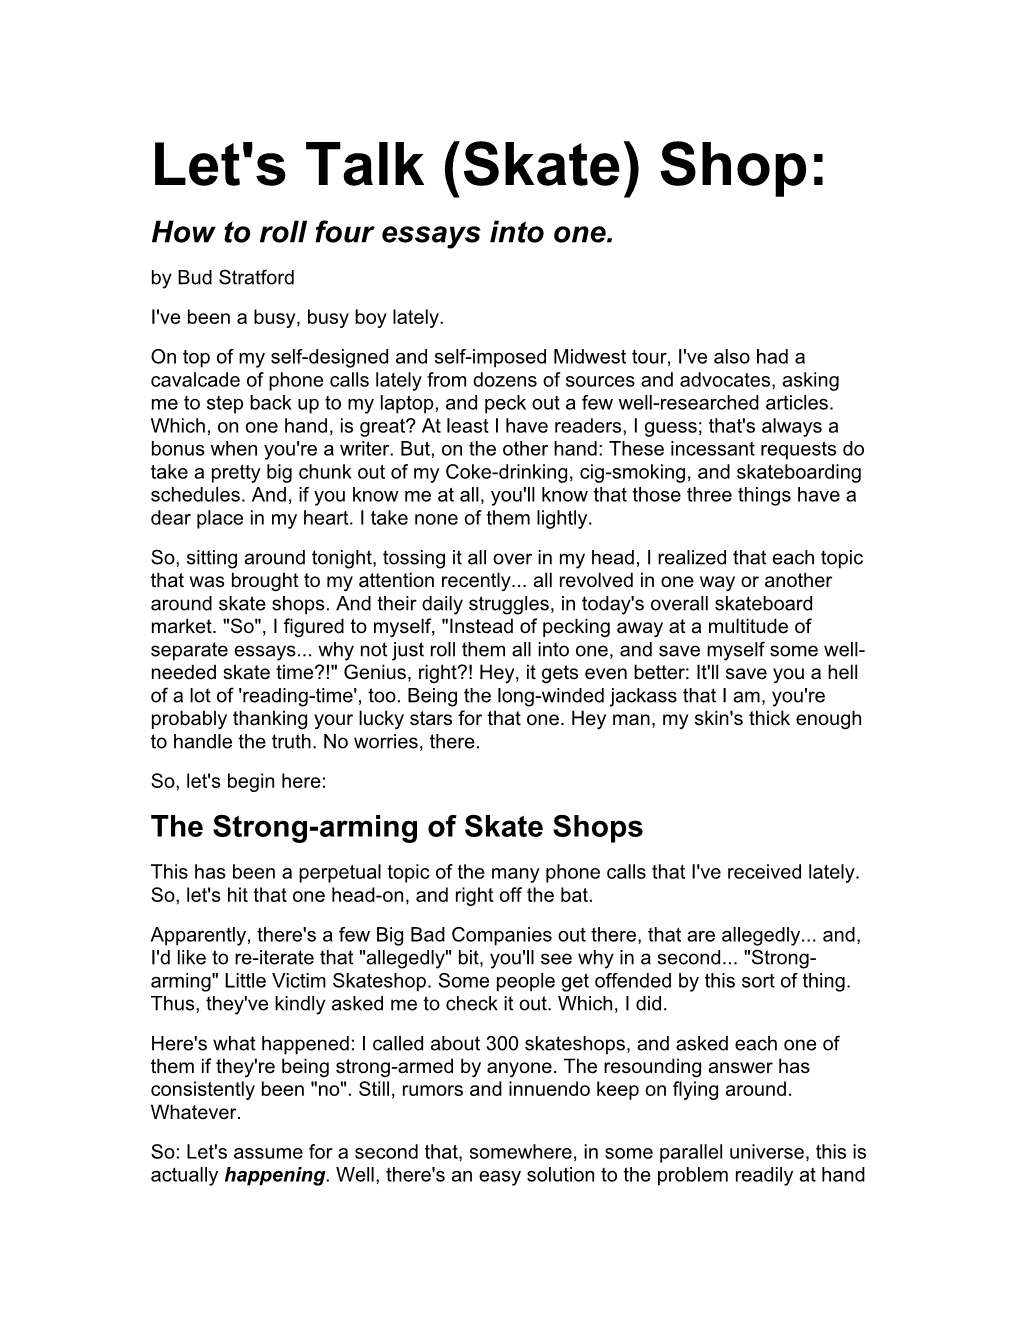 (Skate) Shop: How to Roll Four Essays Into One